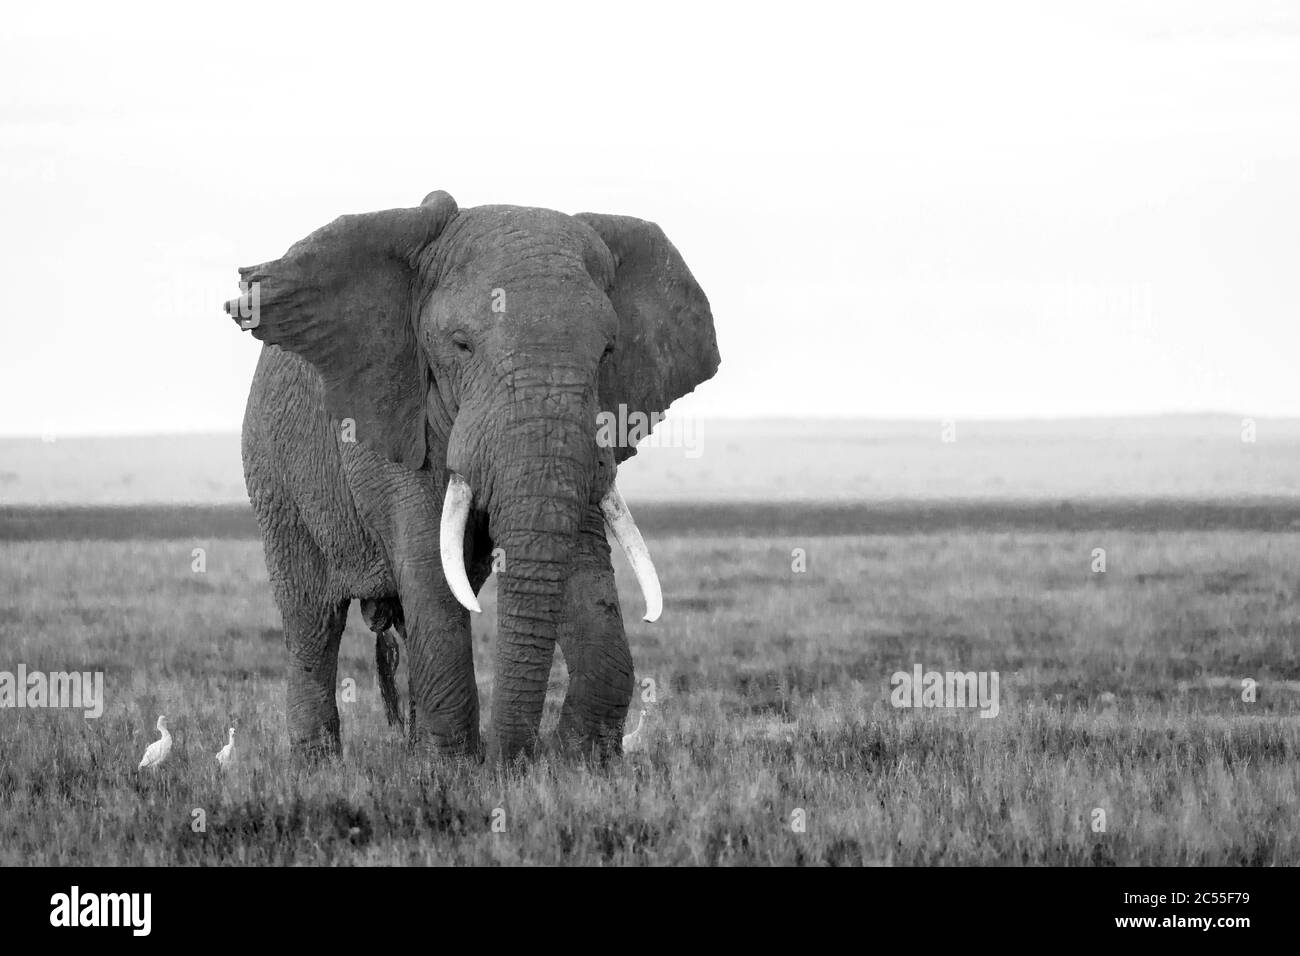 An elephant in the savannah of a national park in Kenya Stock Photo